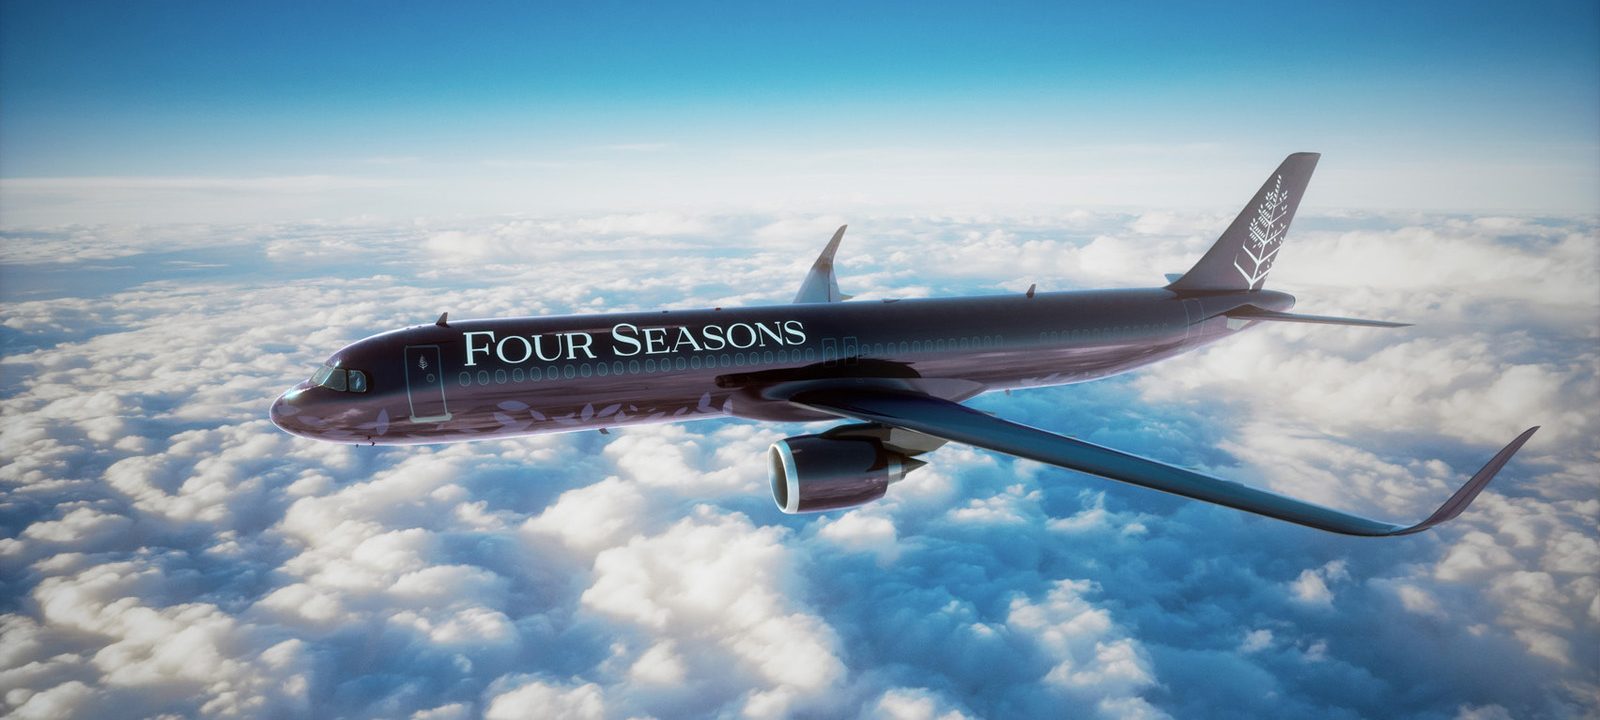 Four Seasons Private Jet takes flight with a brand-new plane